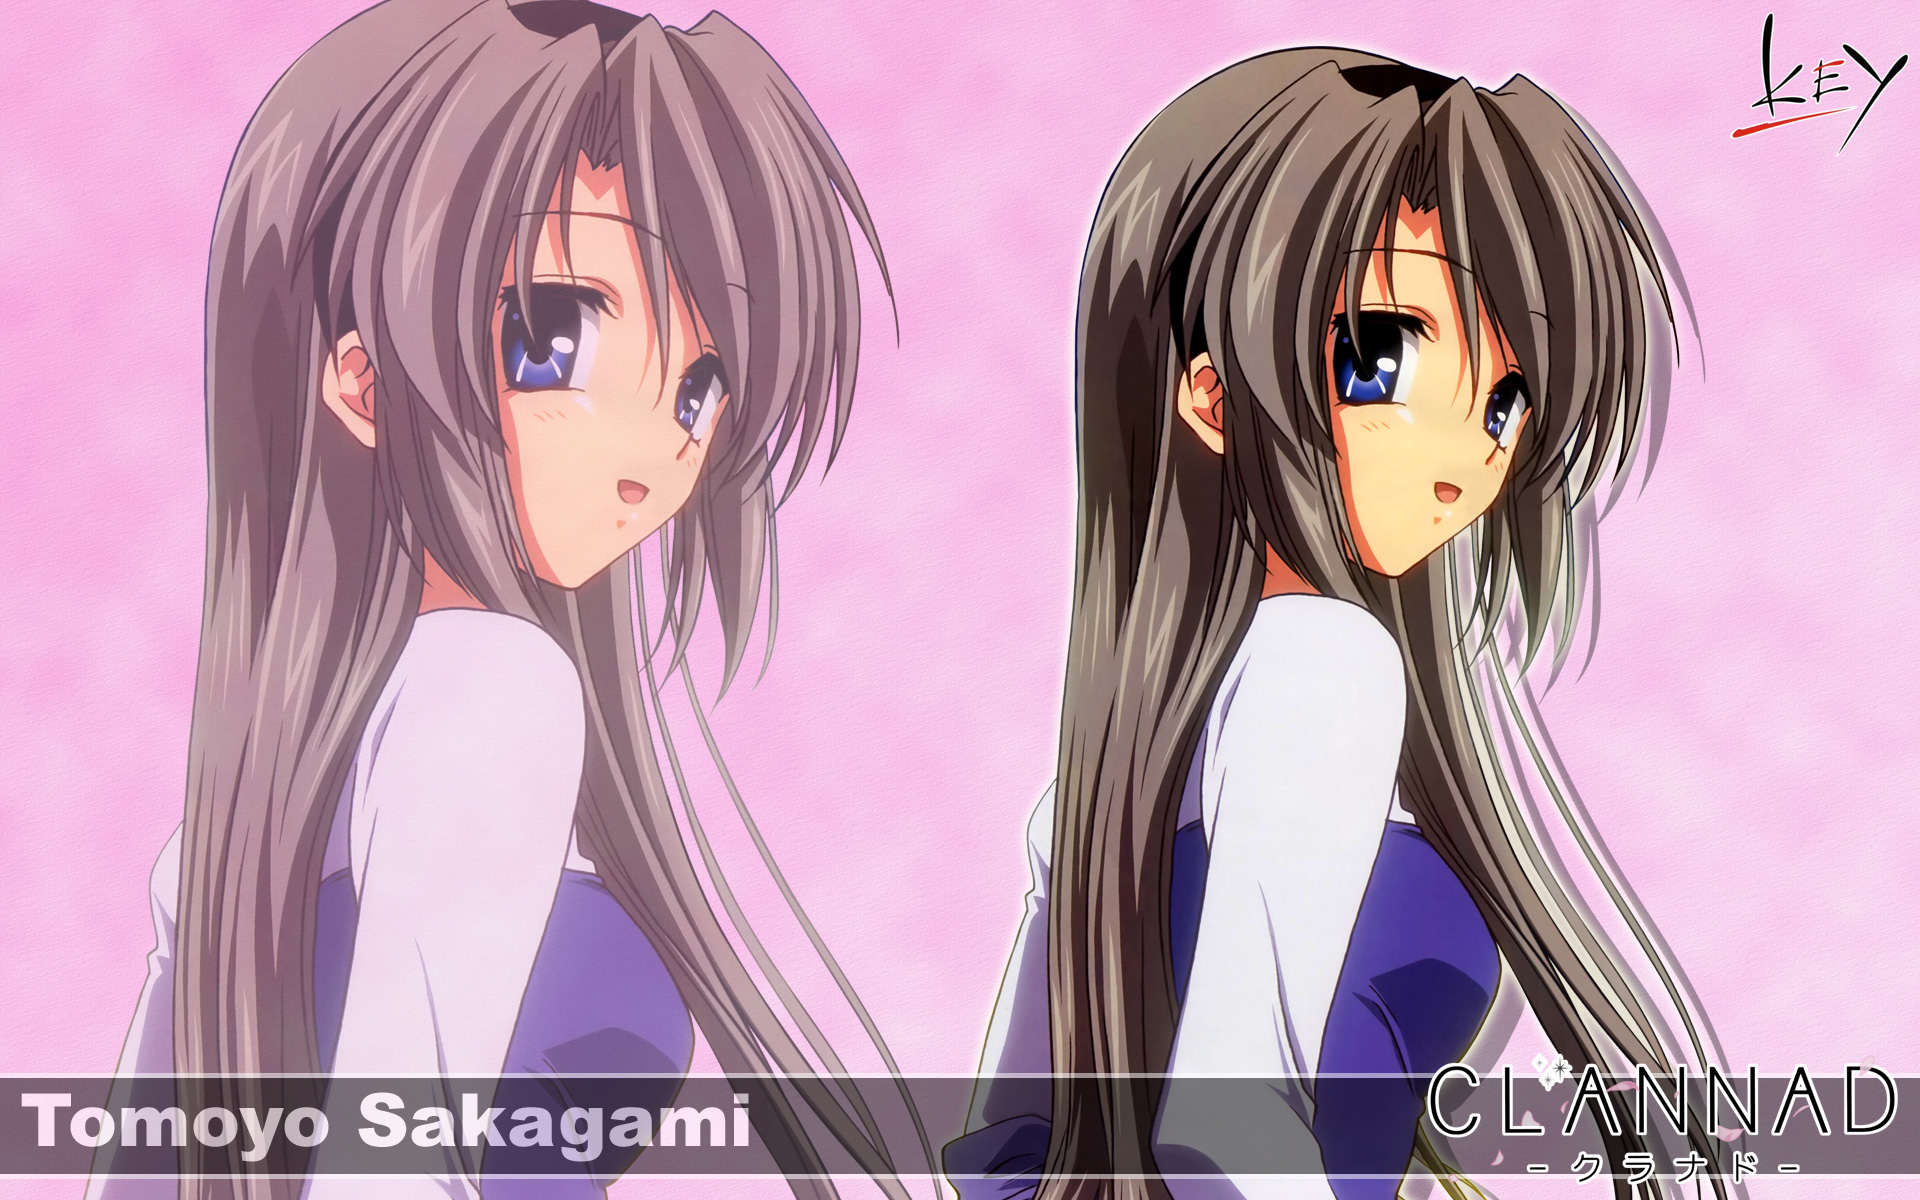 Tomoyo Sakagami from Clannad, the beloved anime character, with an alluring expression.